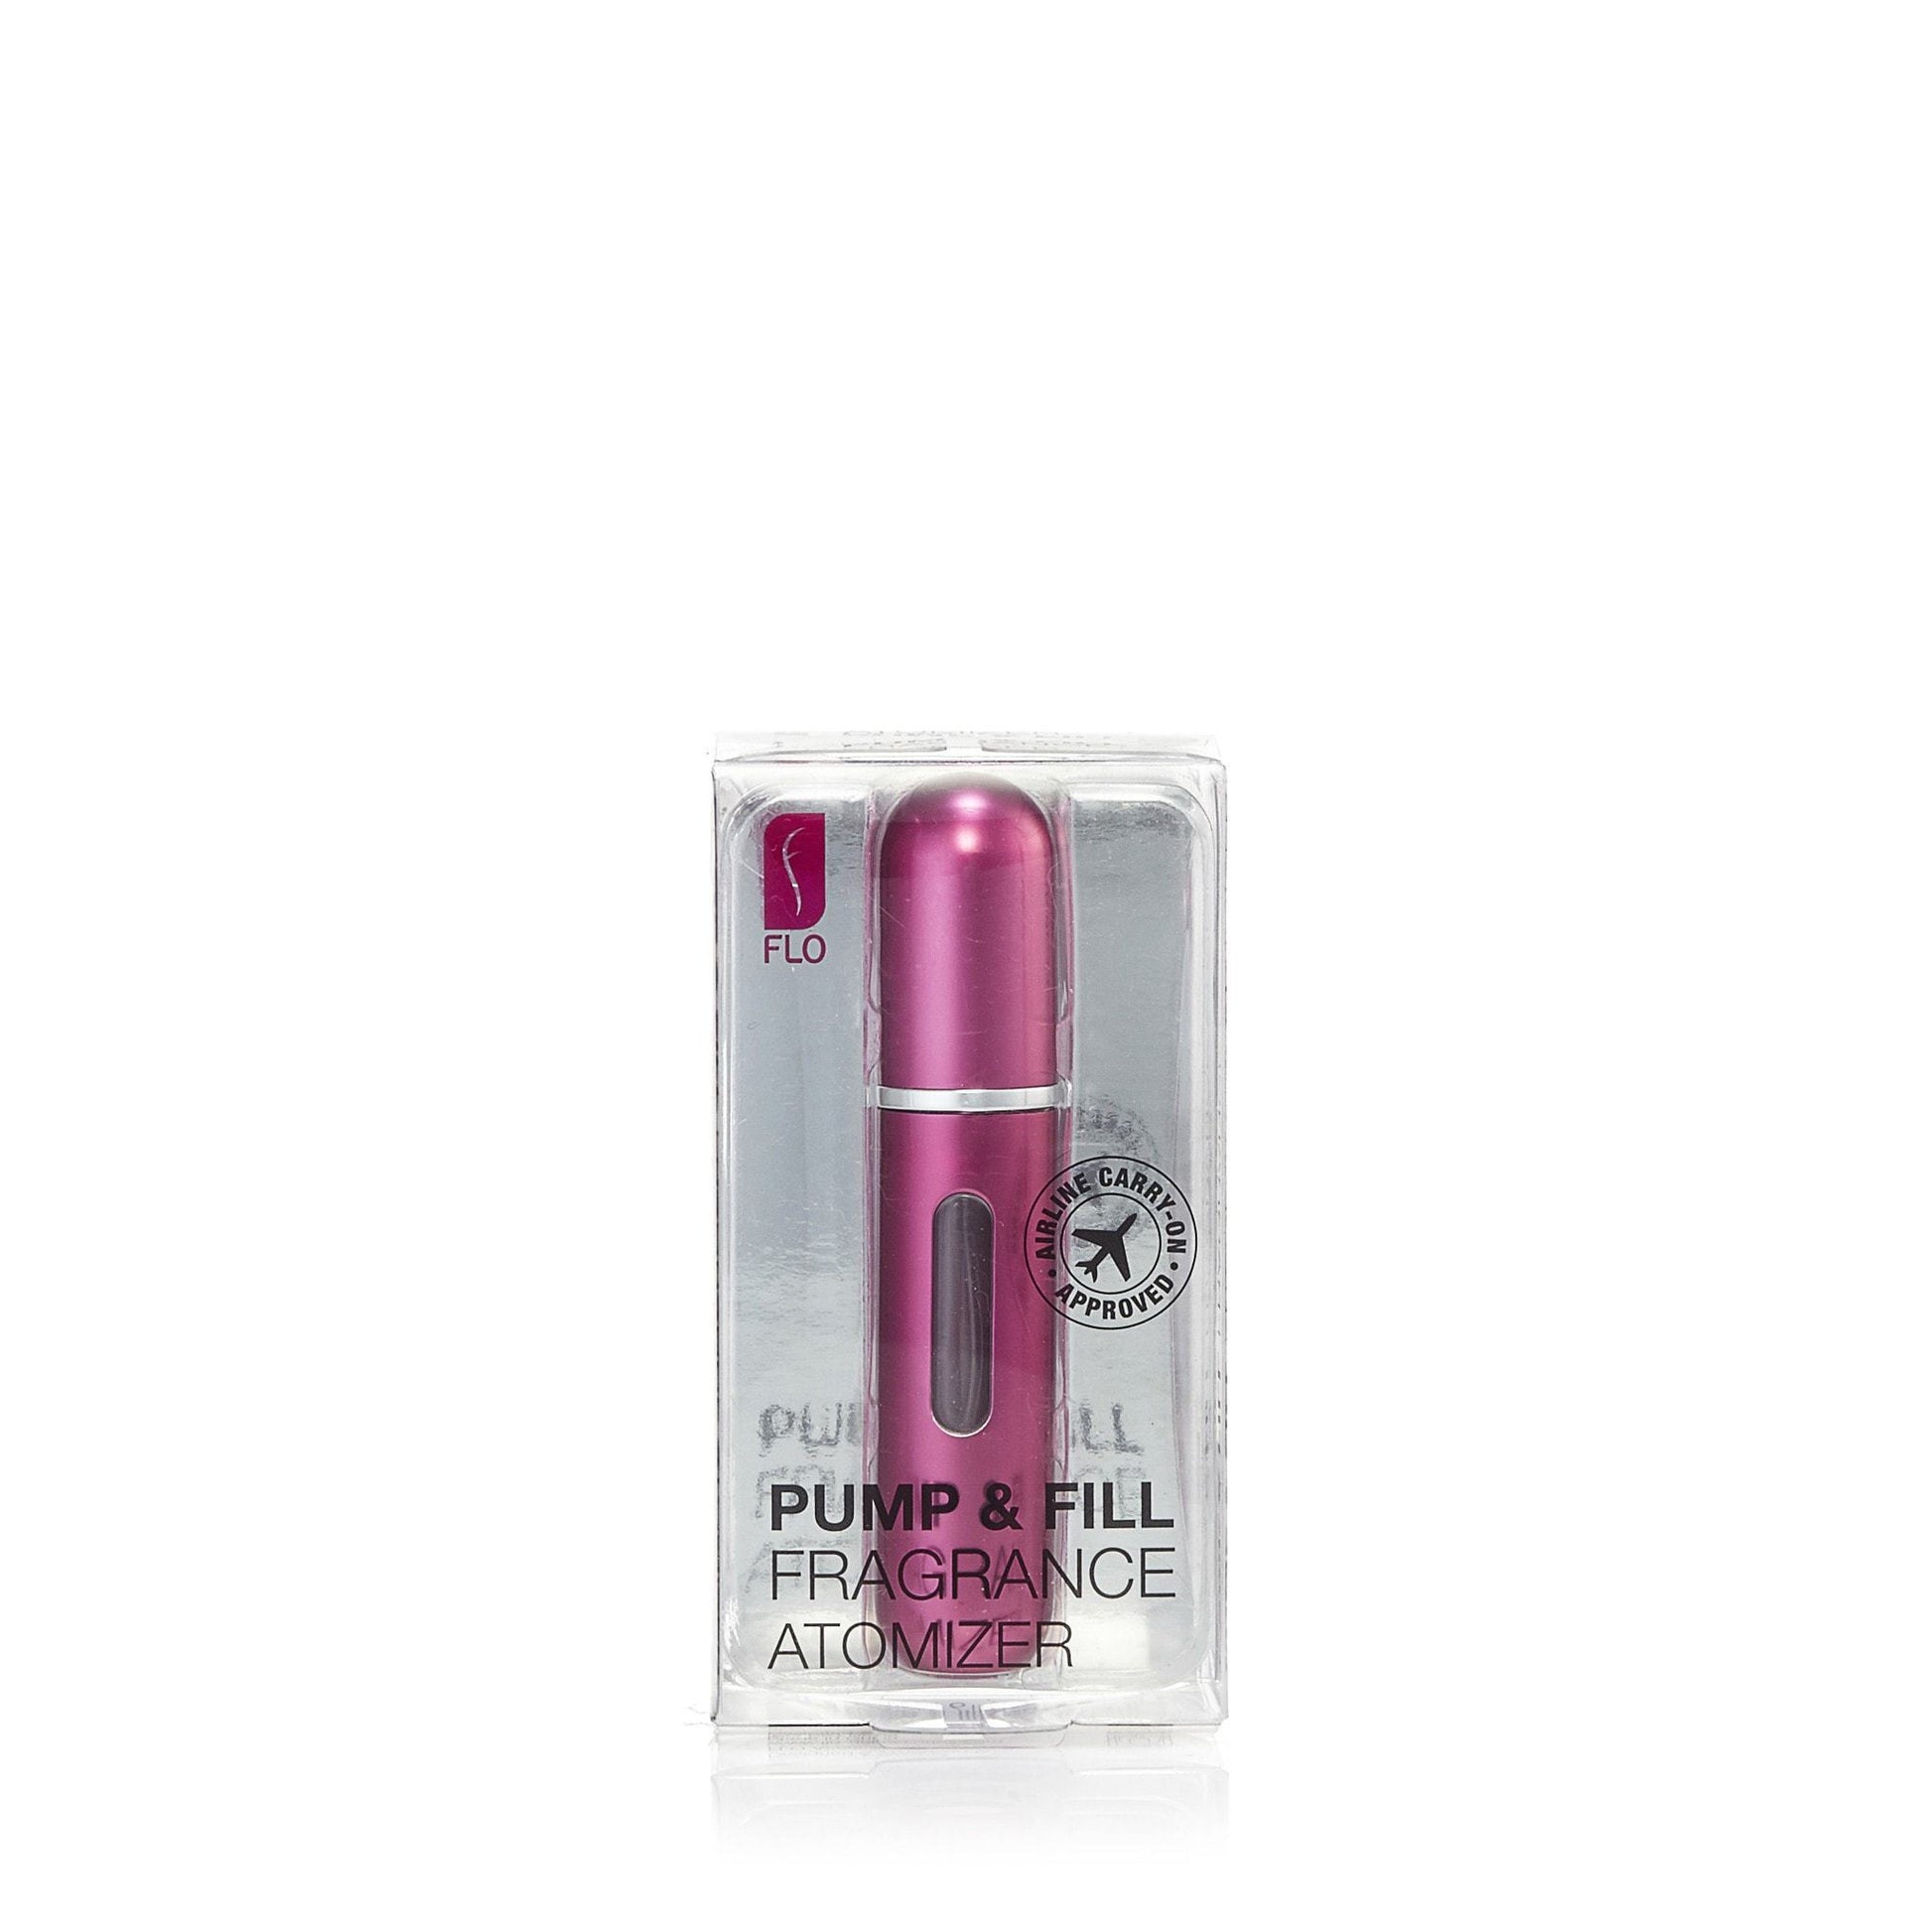 Pump and Fill Fragrance Atomizer by Flo, Product image 8